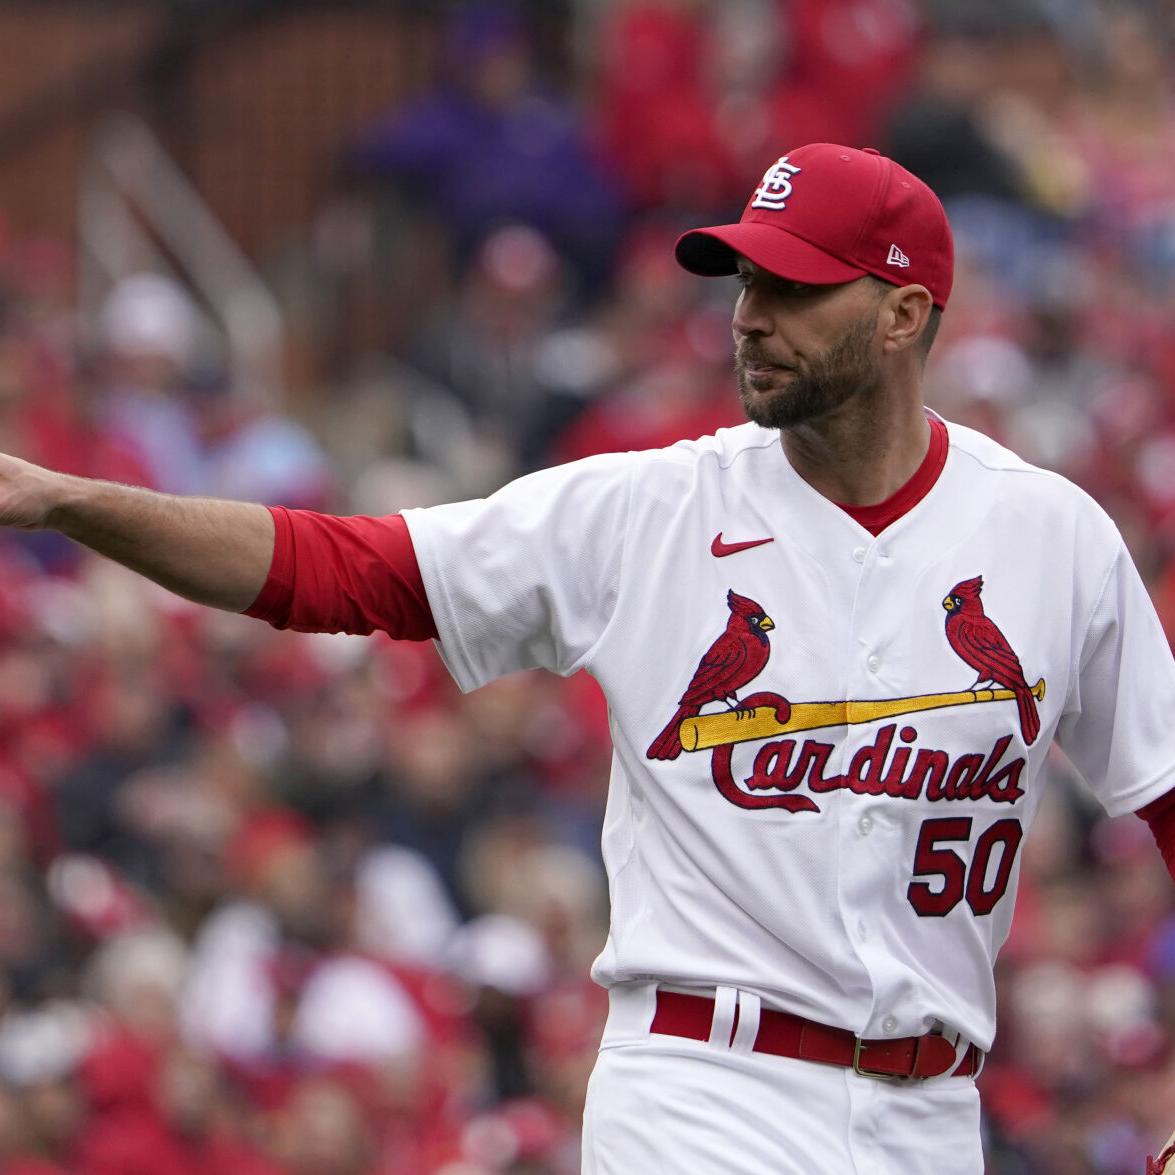 Wainwright pitches two-hit shutout, Cards top Pirates 4-0